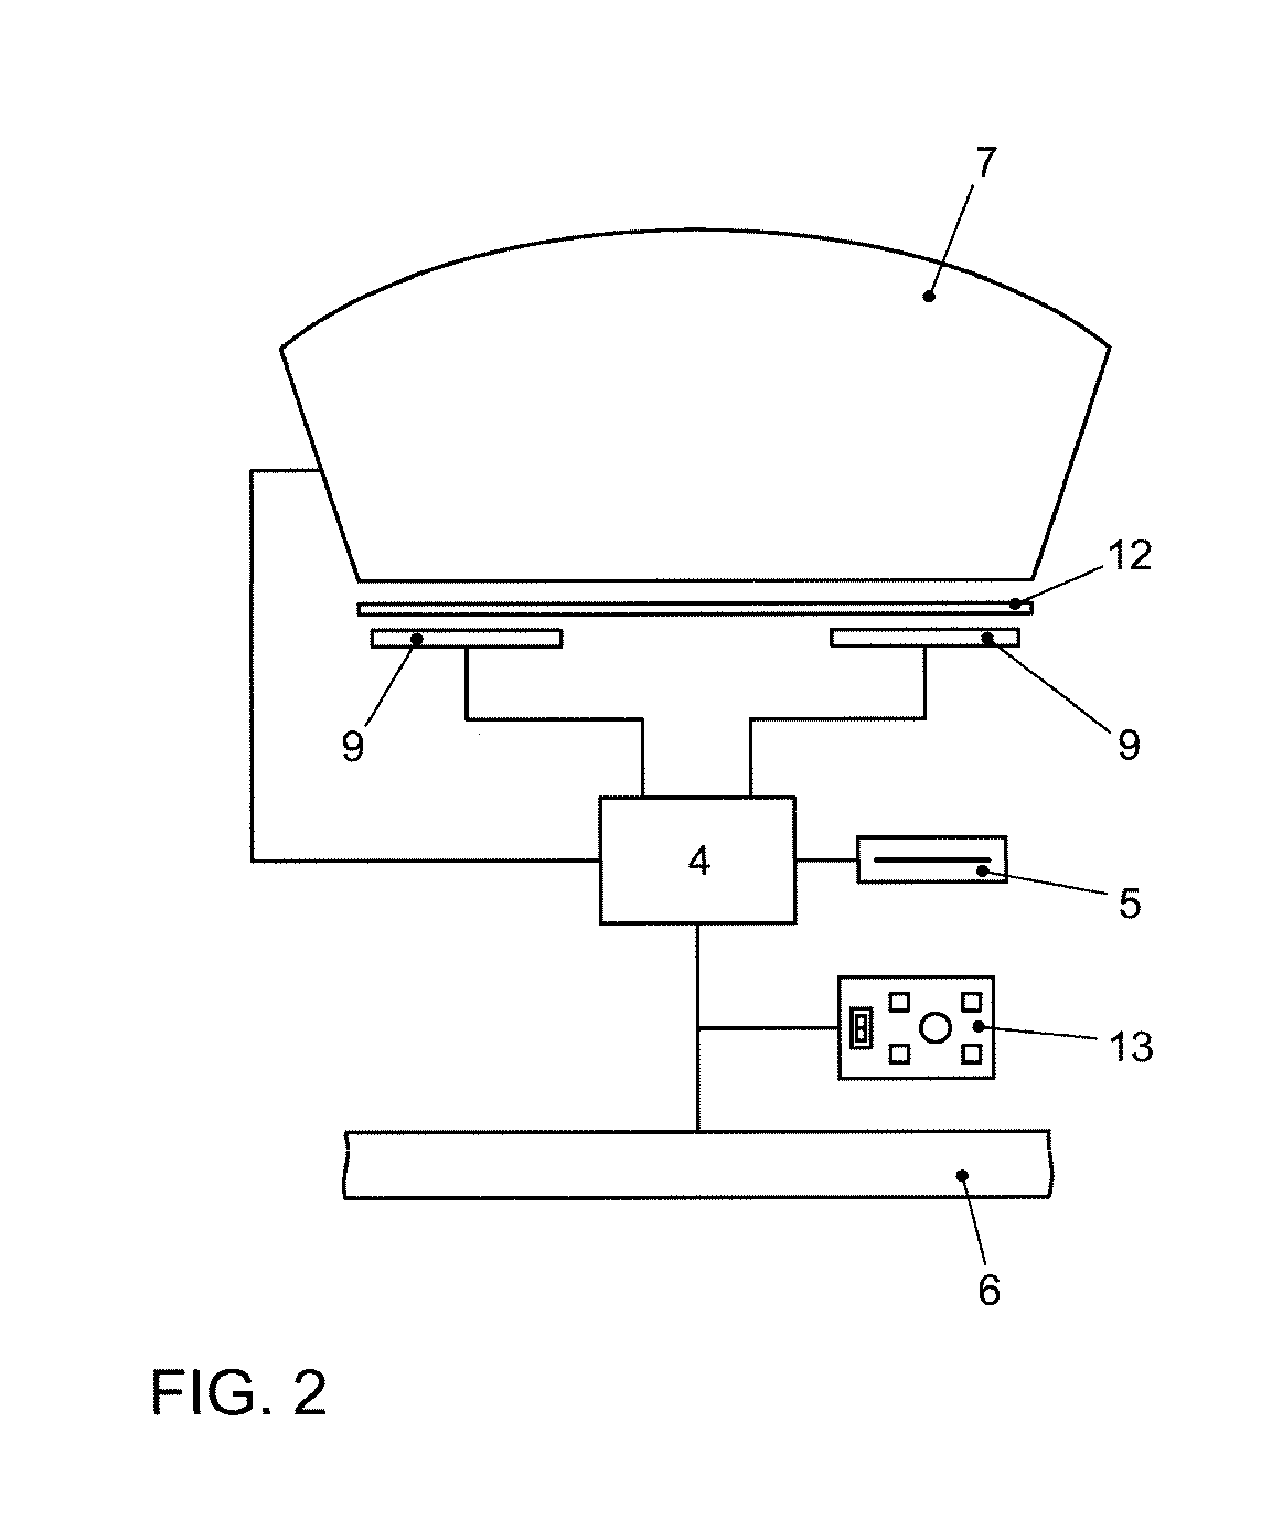 Display device for a vehicle for displaying information relating to the operation of the vehicle and method for displaying this information